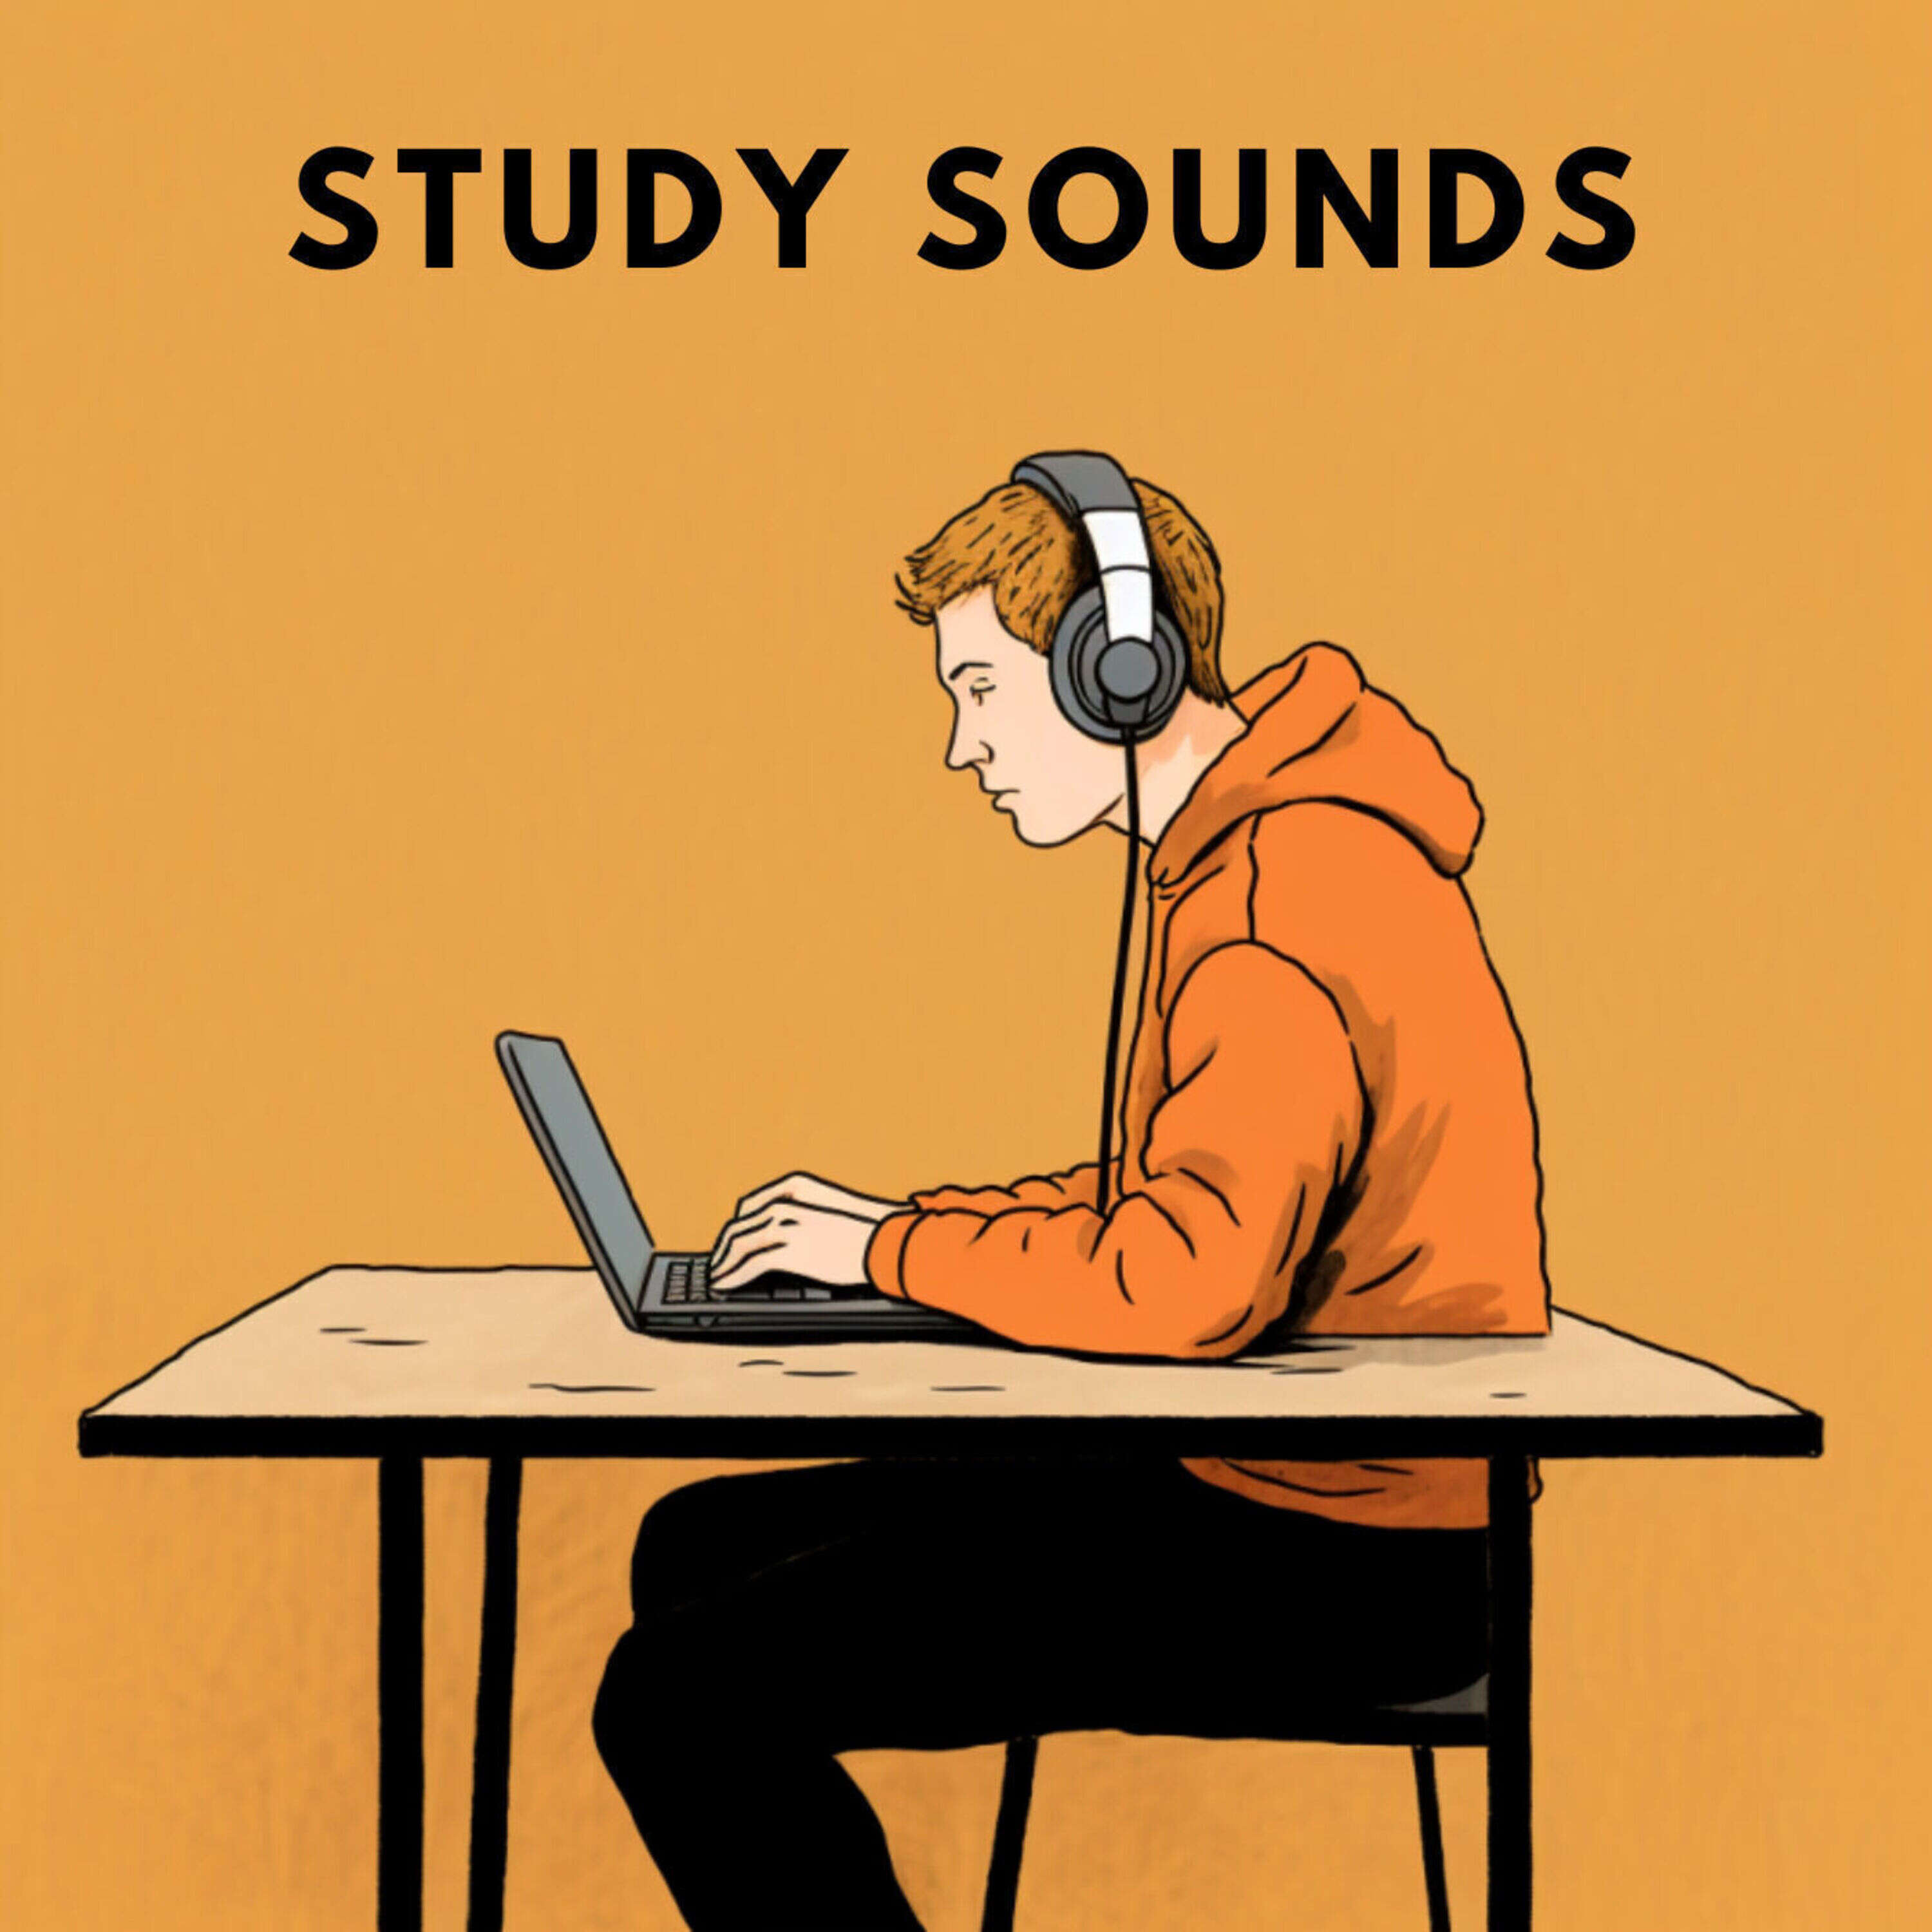 Study sounds Project - Dream of Love (sounds for Studying)